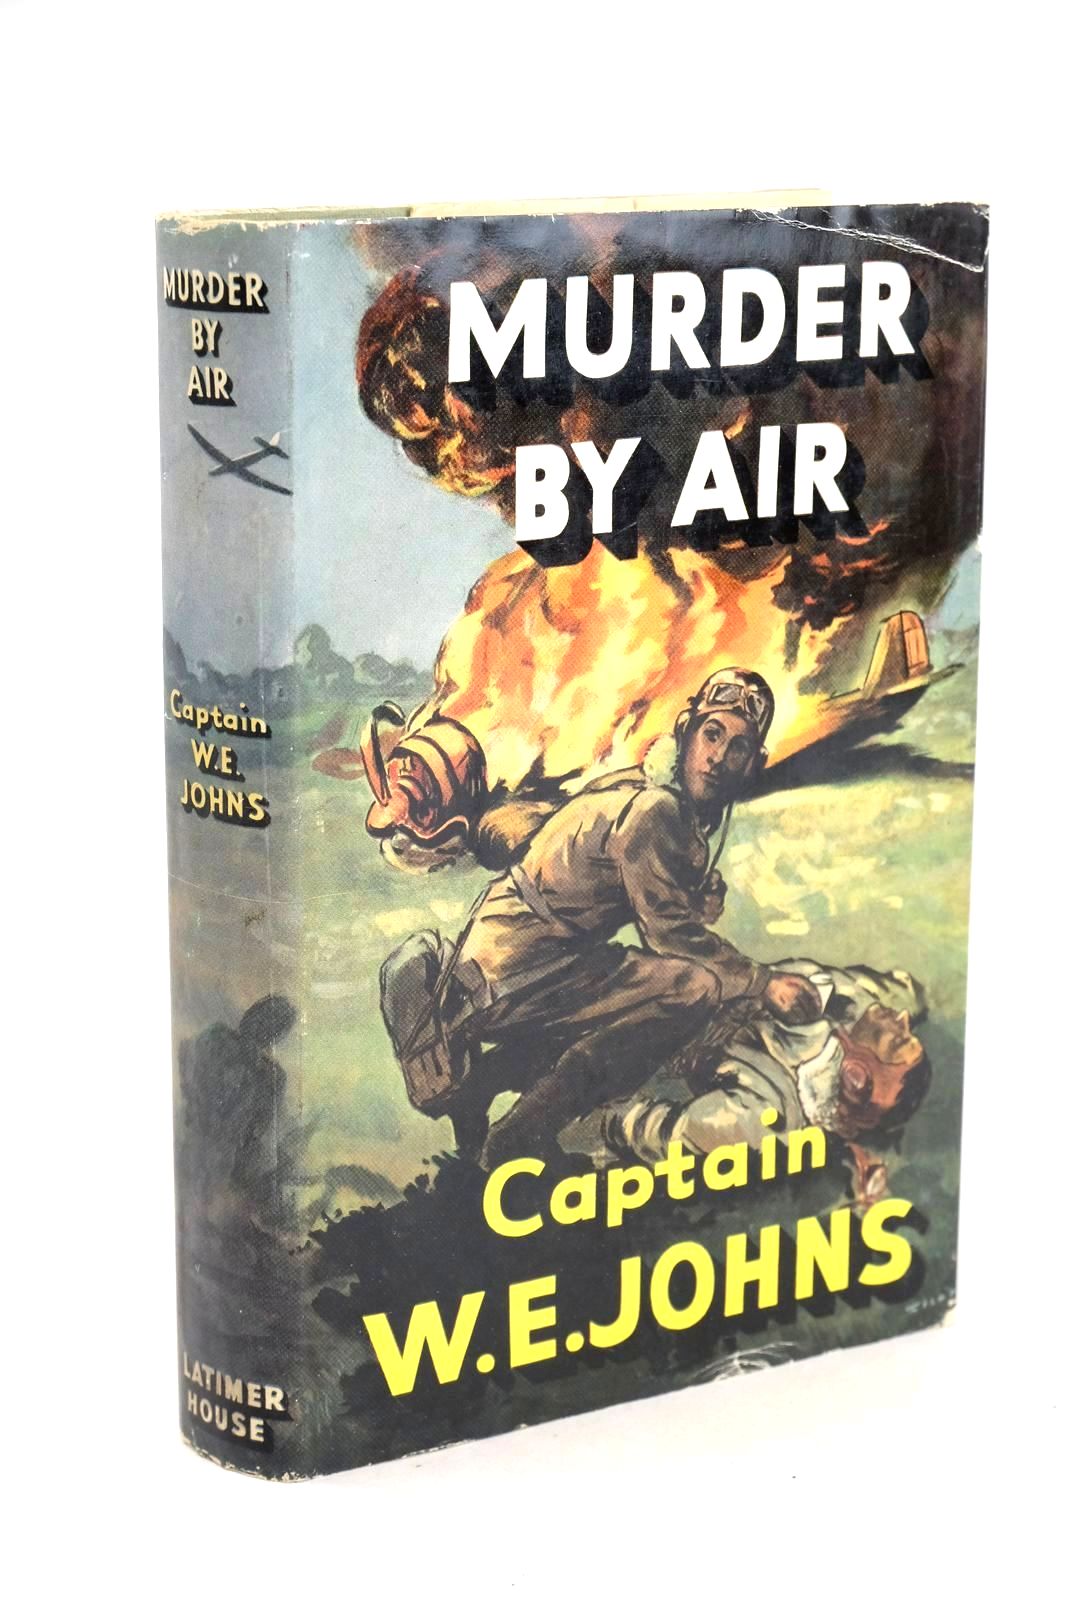 Photo of MURDER BY AIR written by Johns, W.E. published by Latimer House Ltd. (STOCK CODE: 1326227)  for sale by Stella & Rose's Books